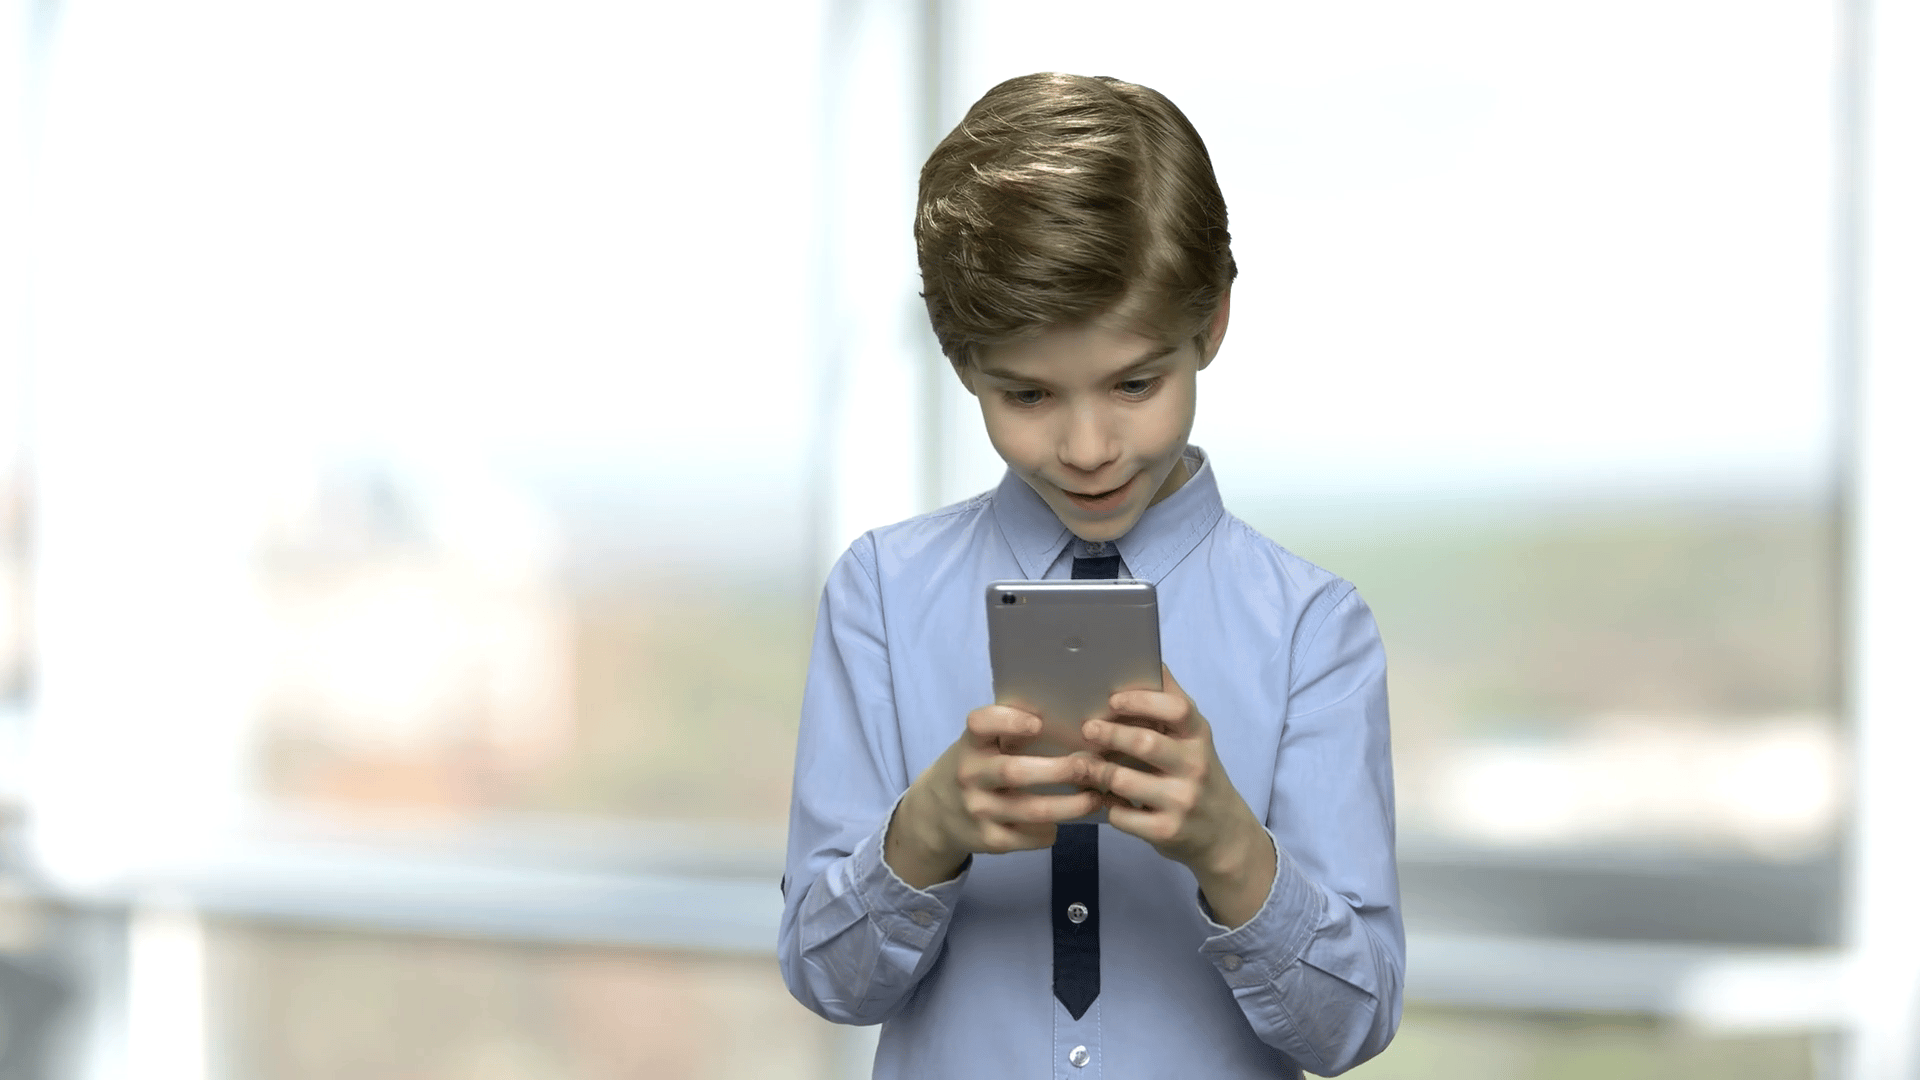 5 Best Child android mobile Tracking Apps